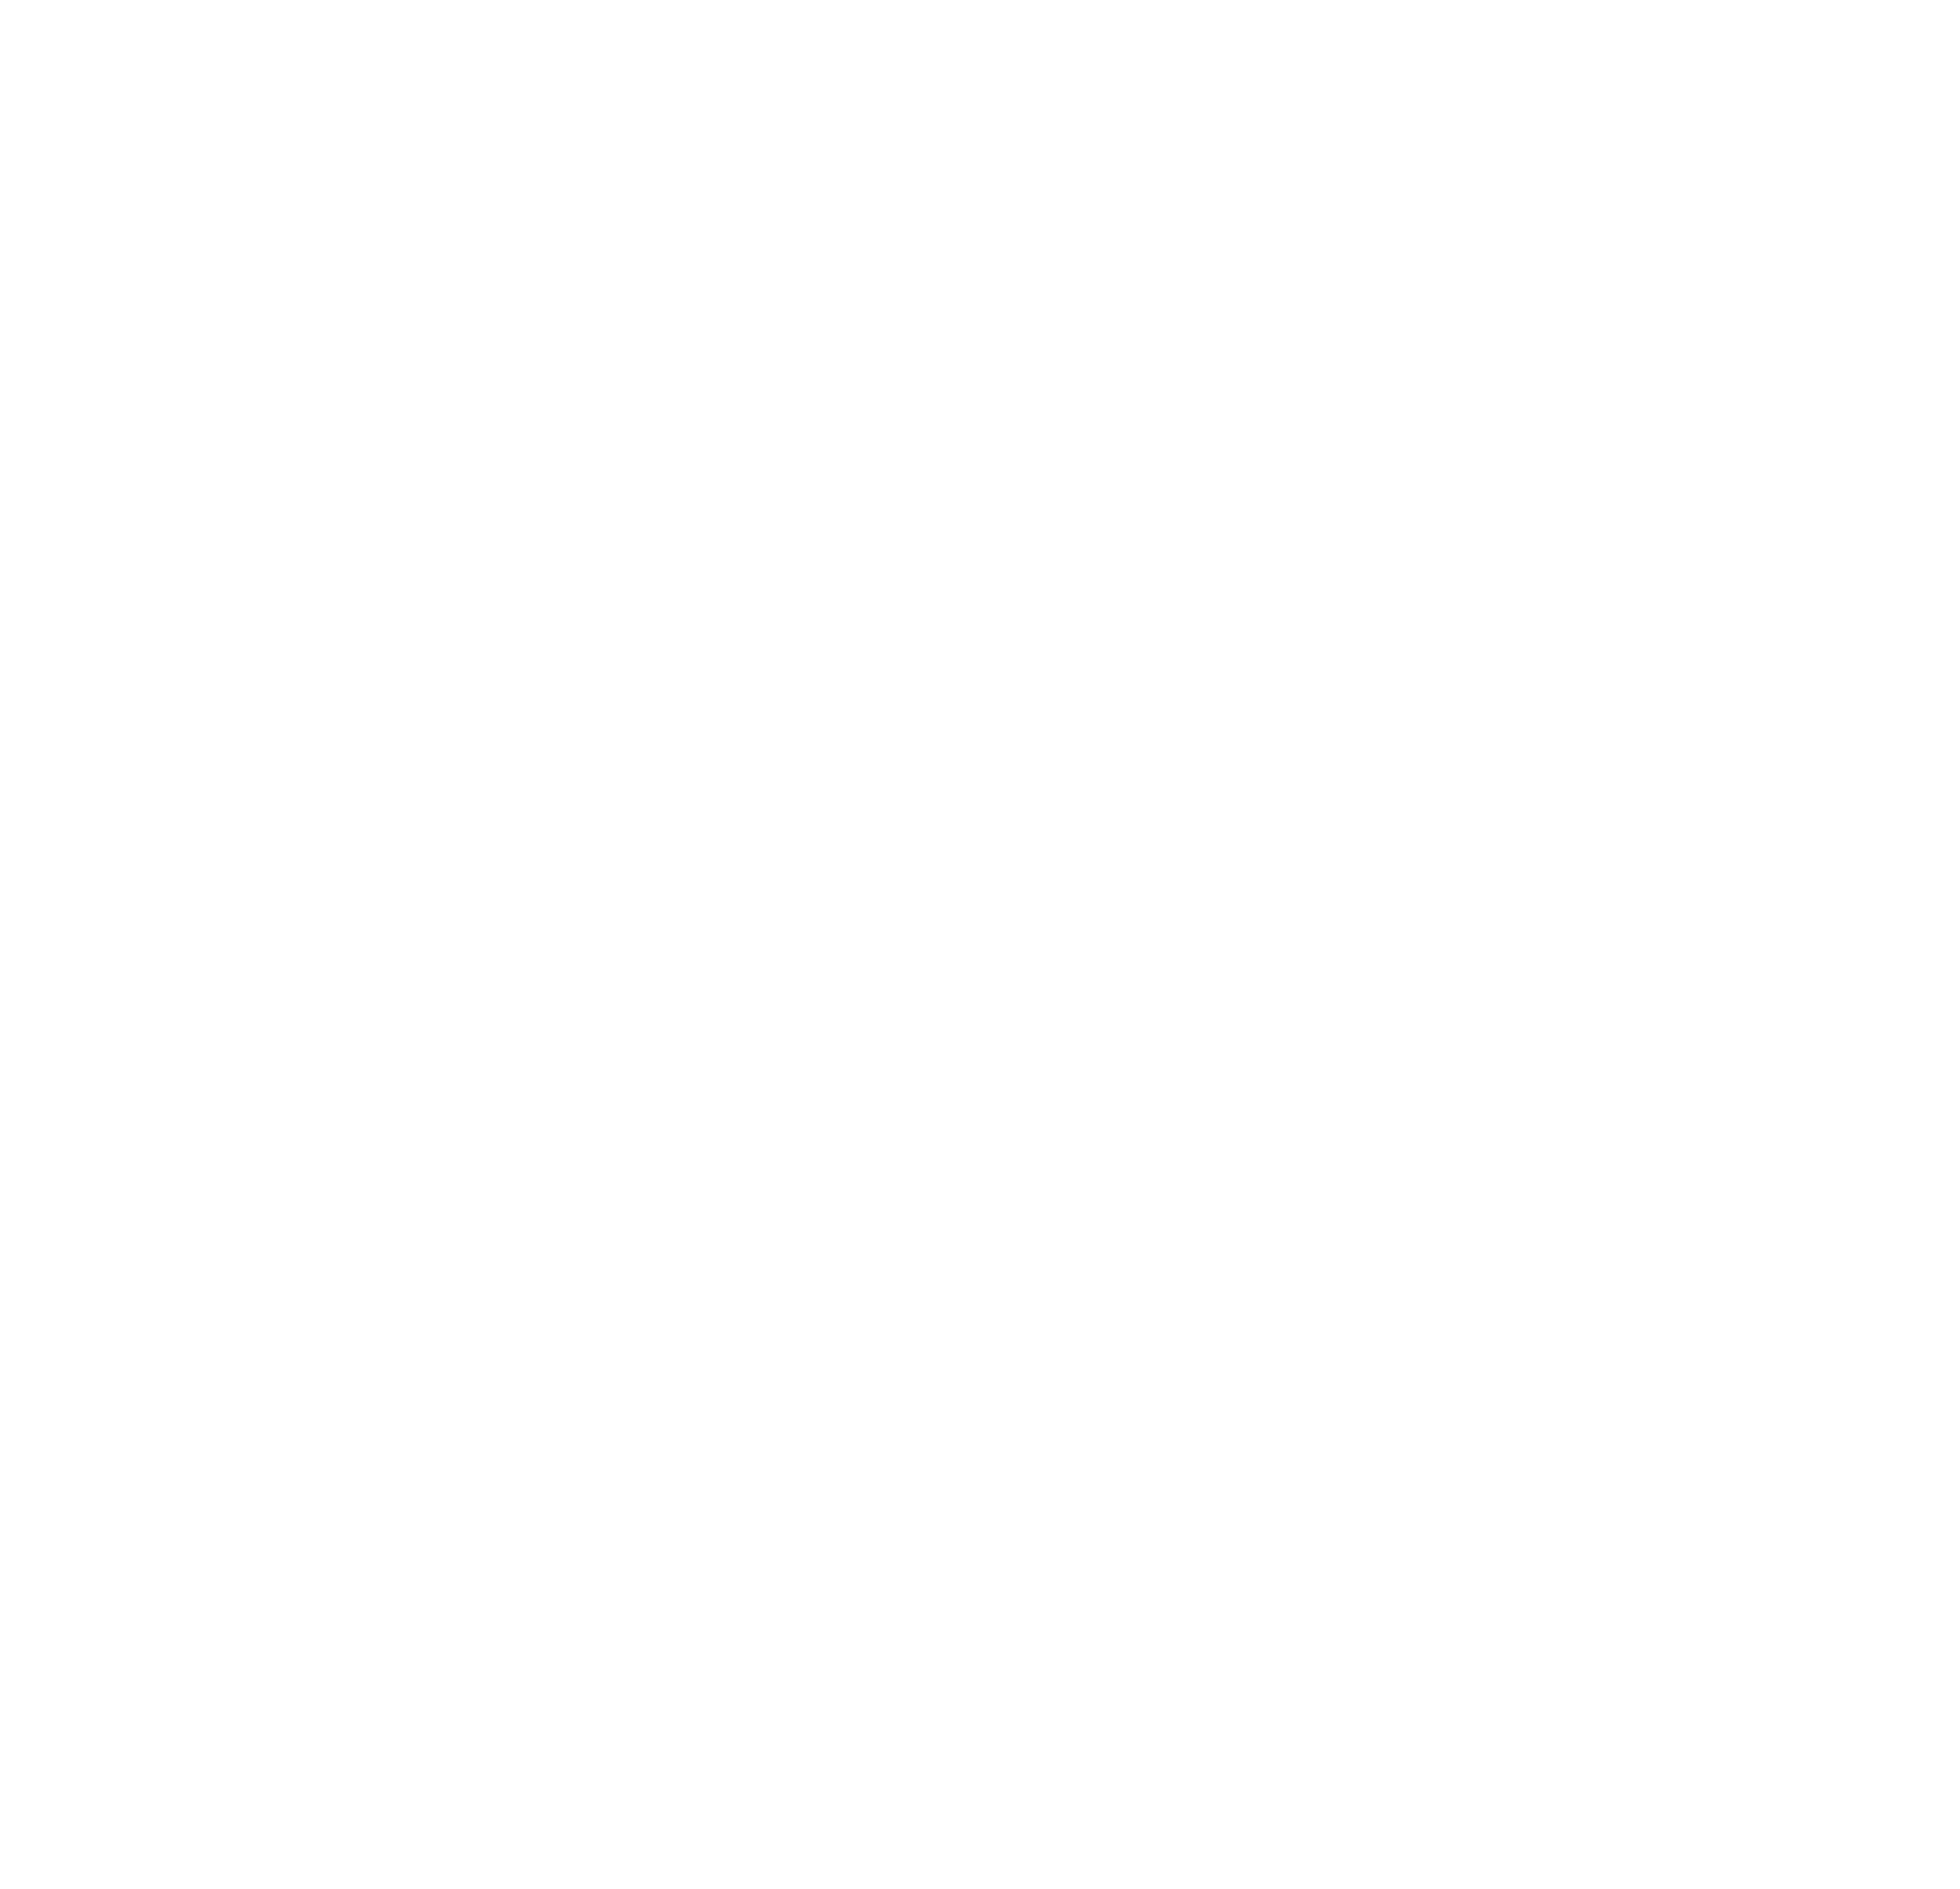 Iowans United for Opportunity